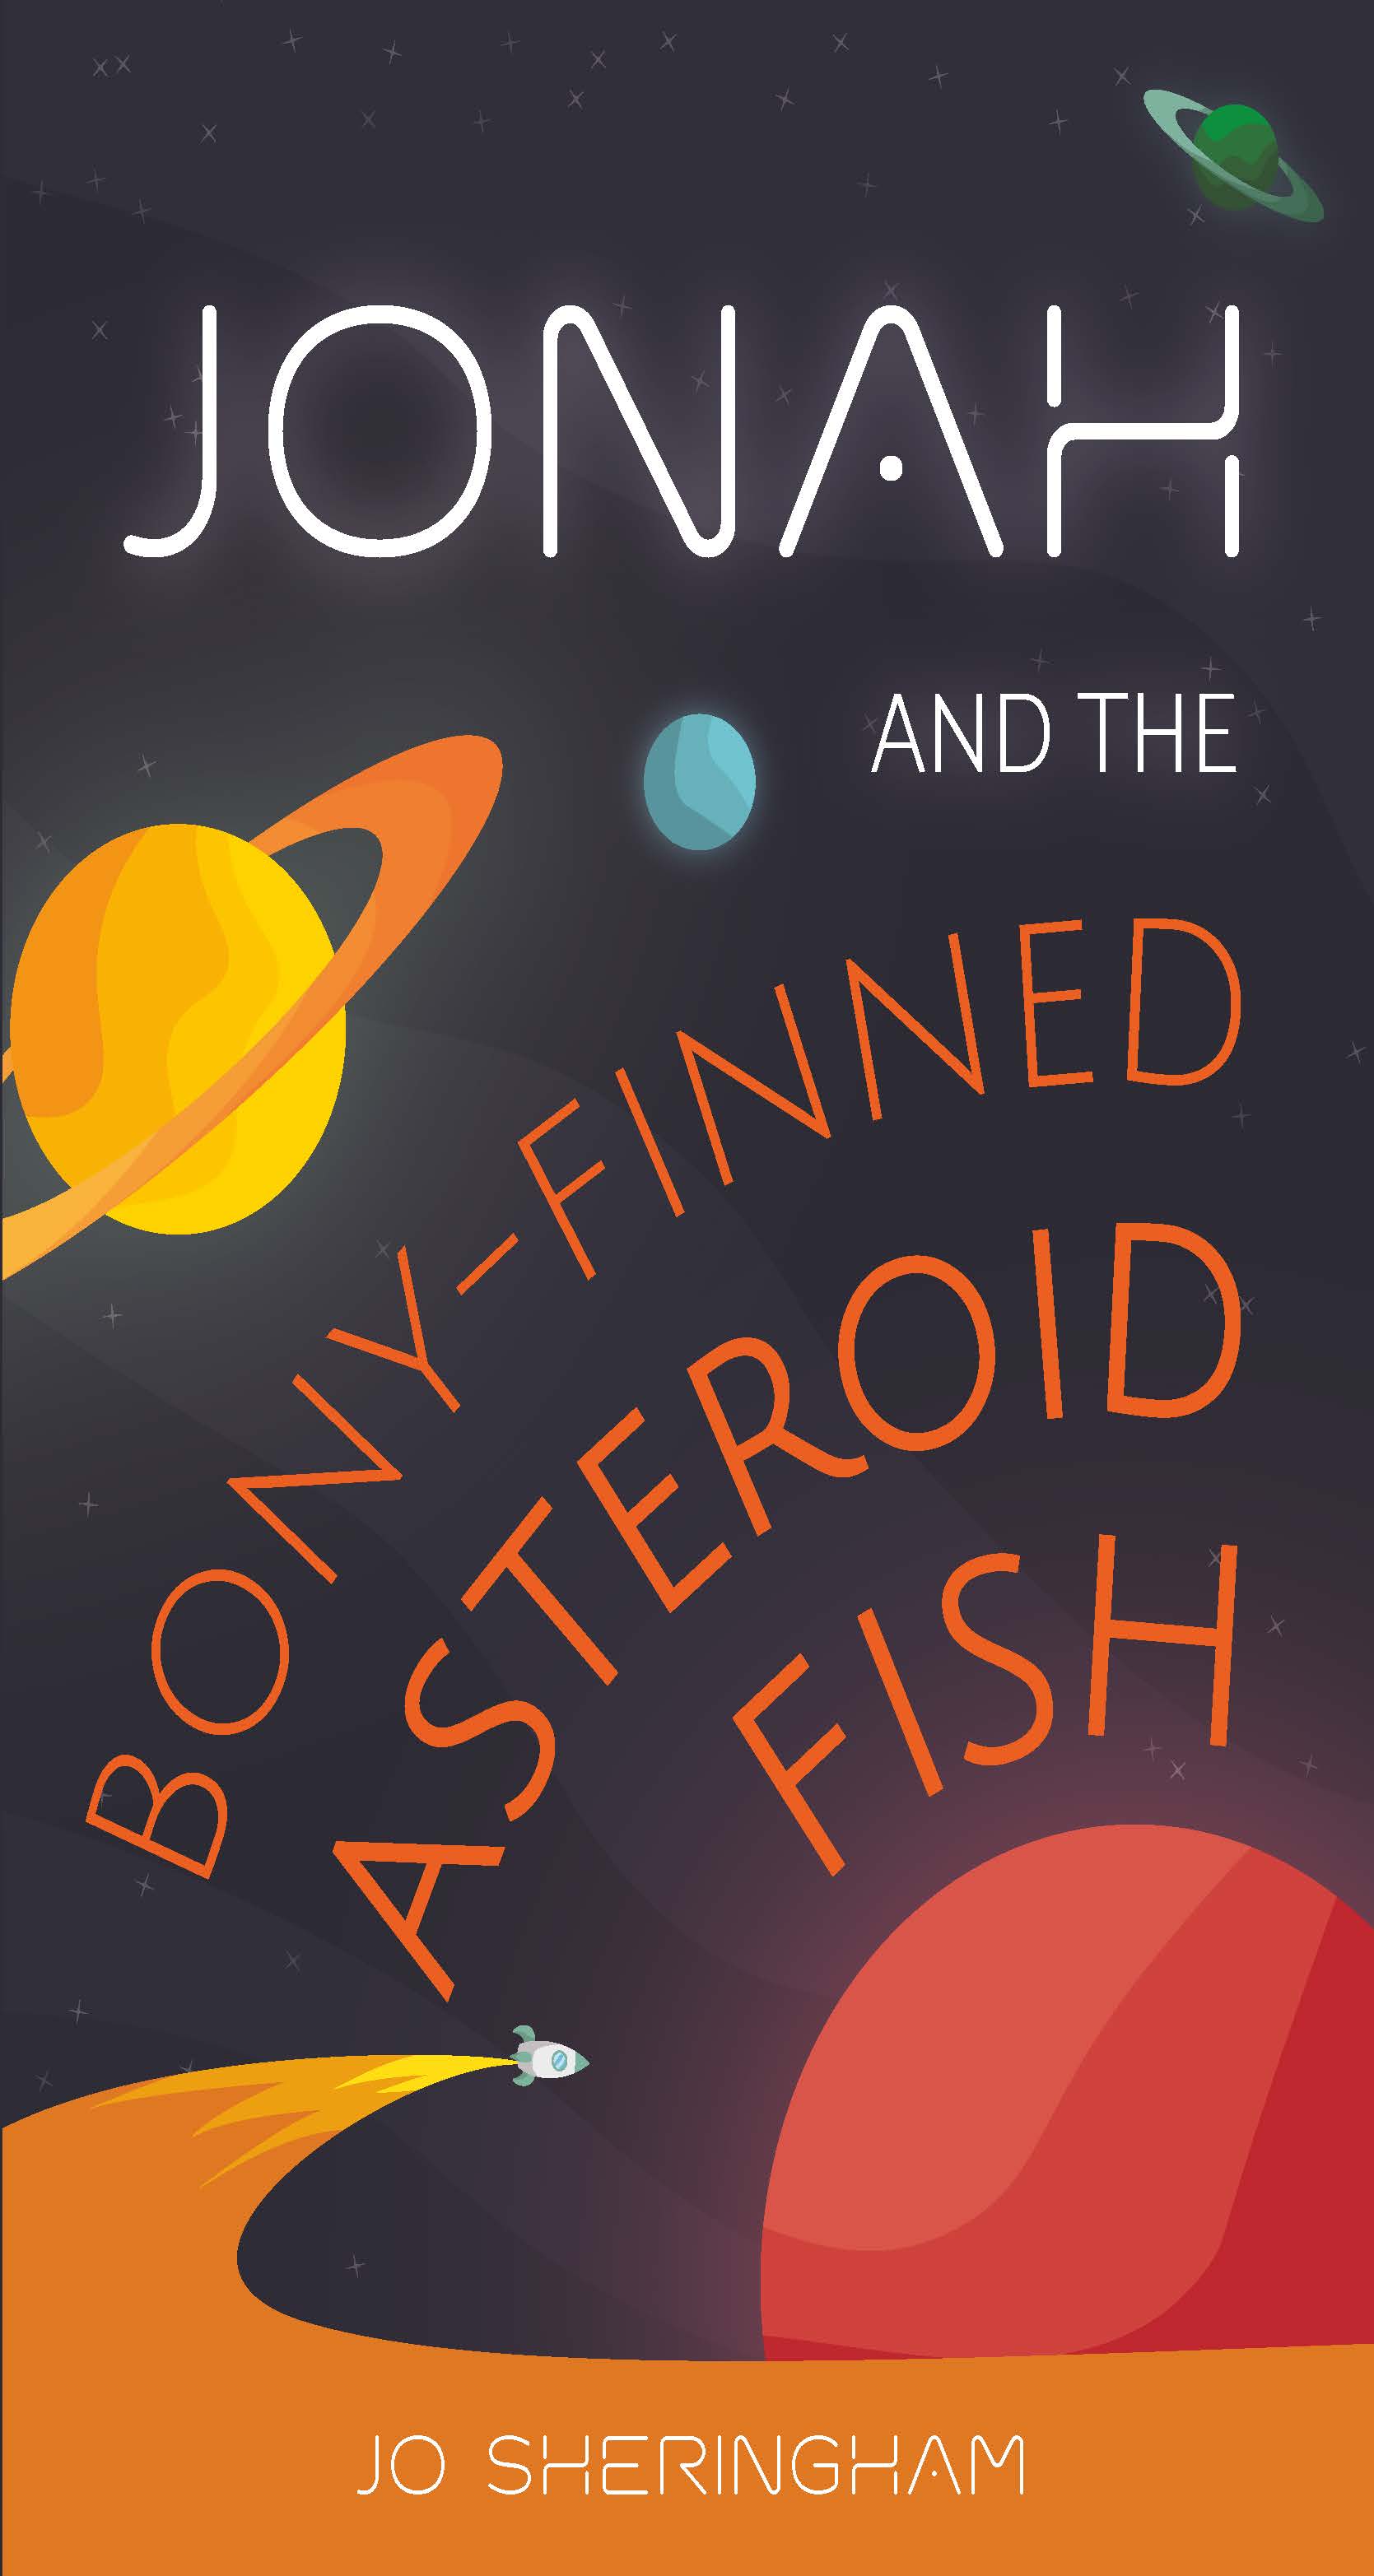 More information on Jonah and the Bony-Finned Asteroid Fish